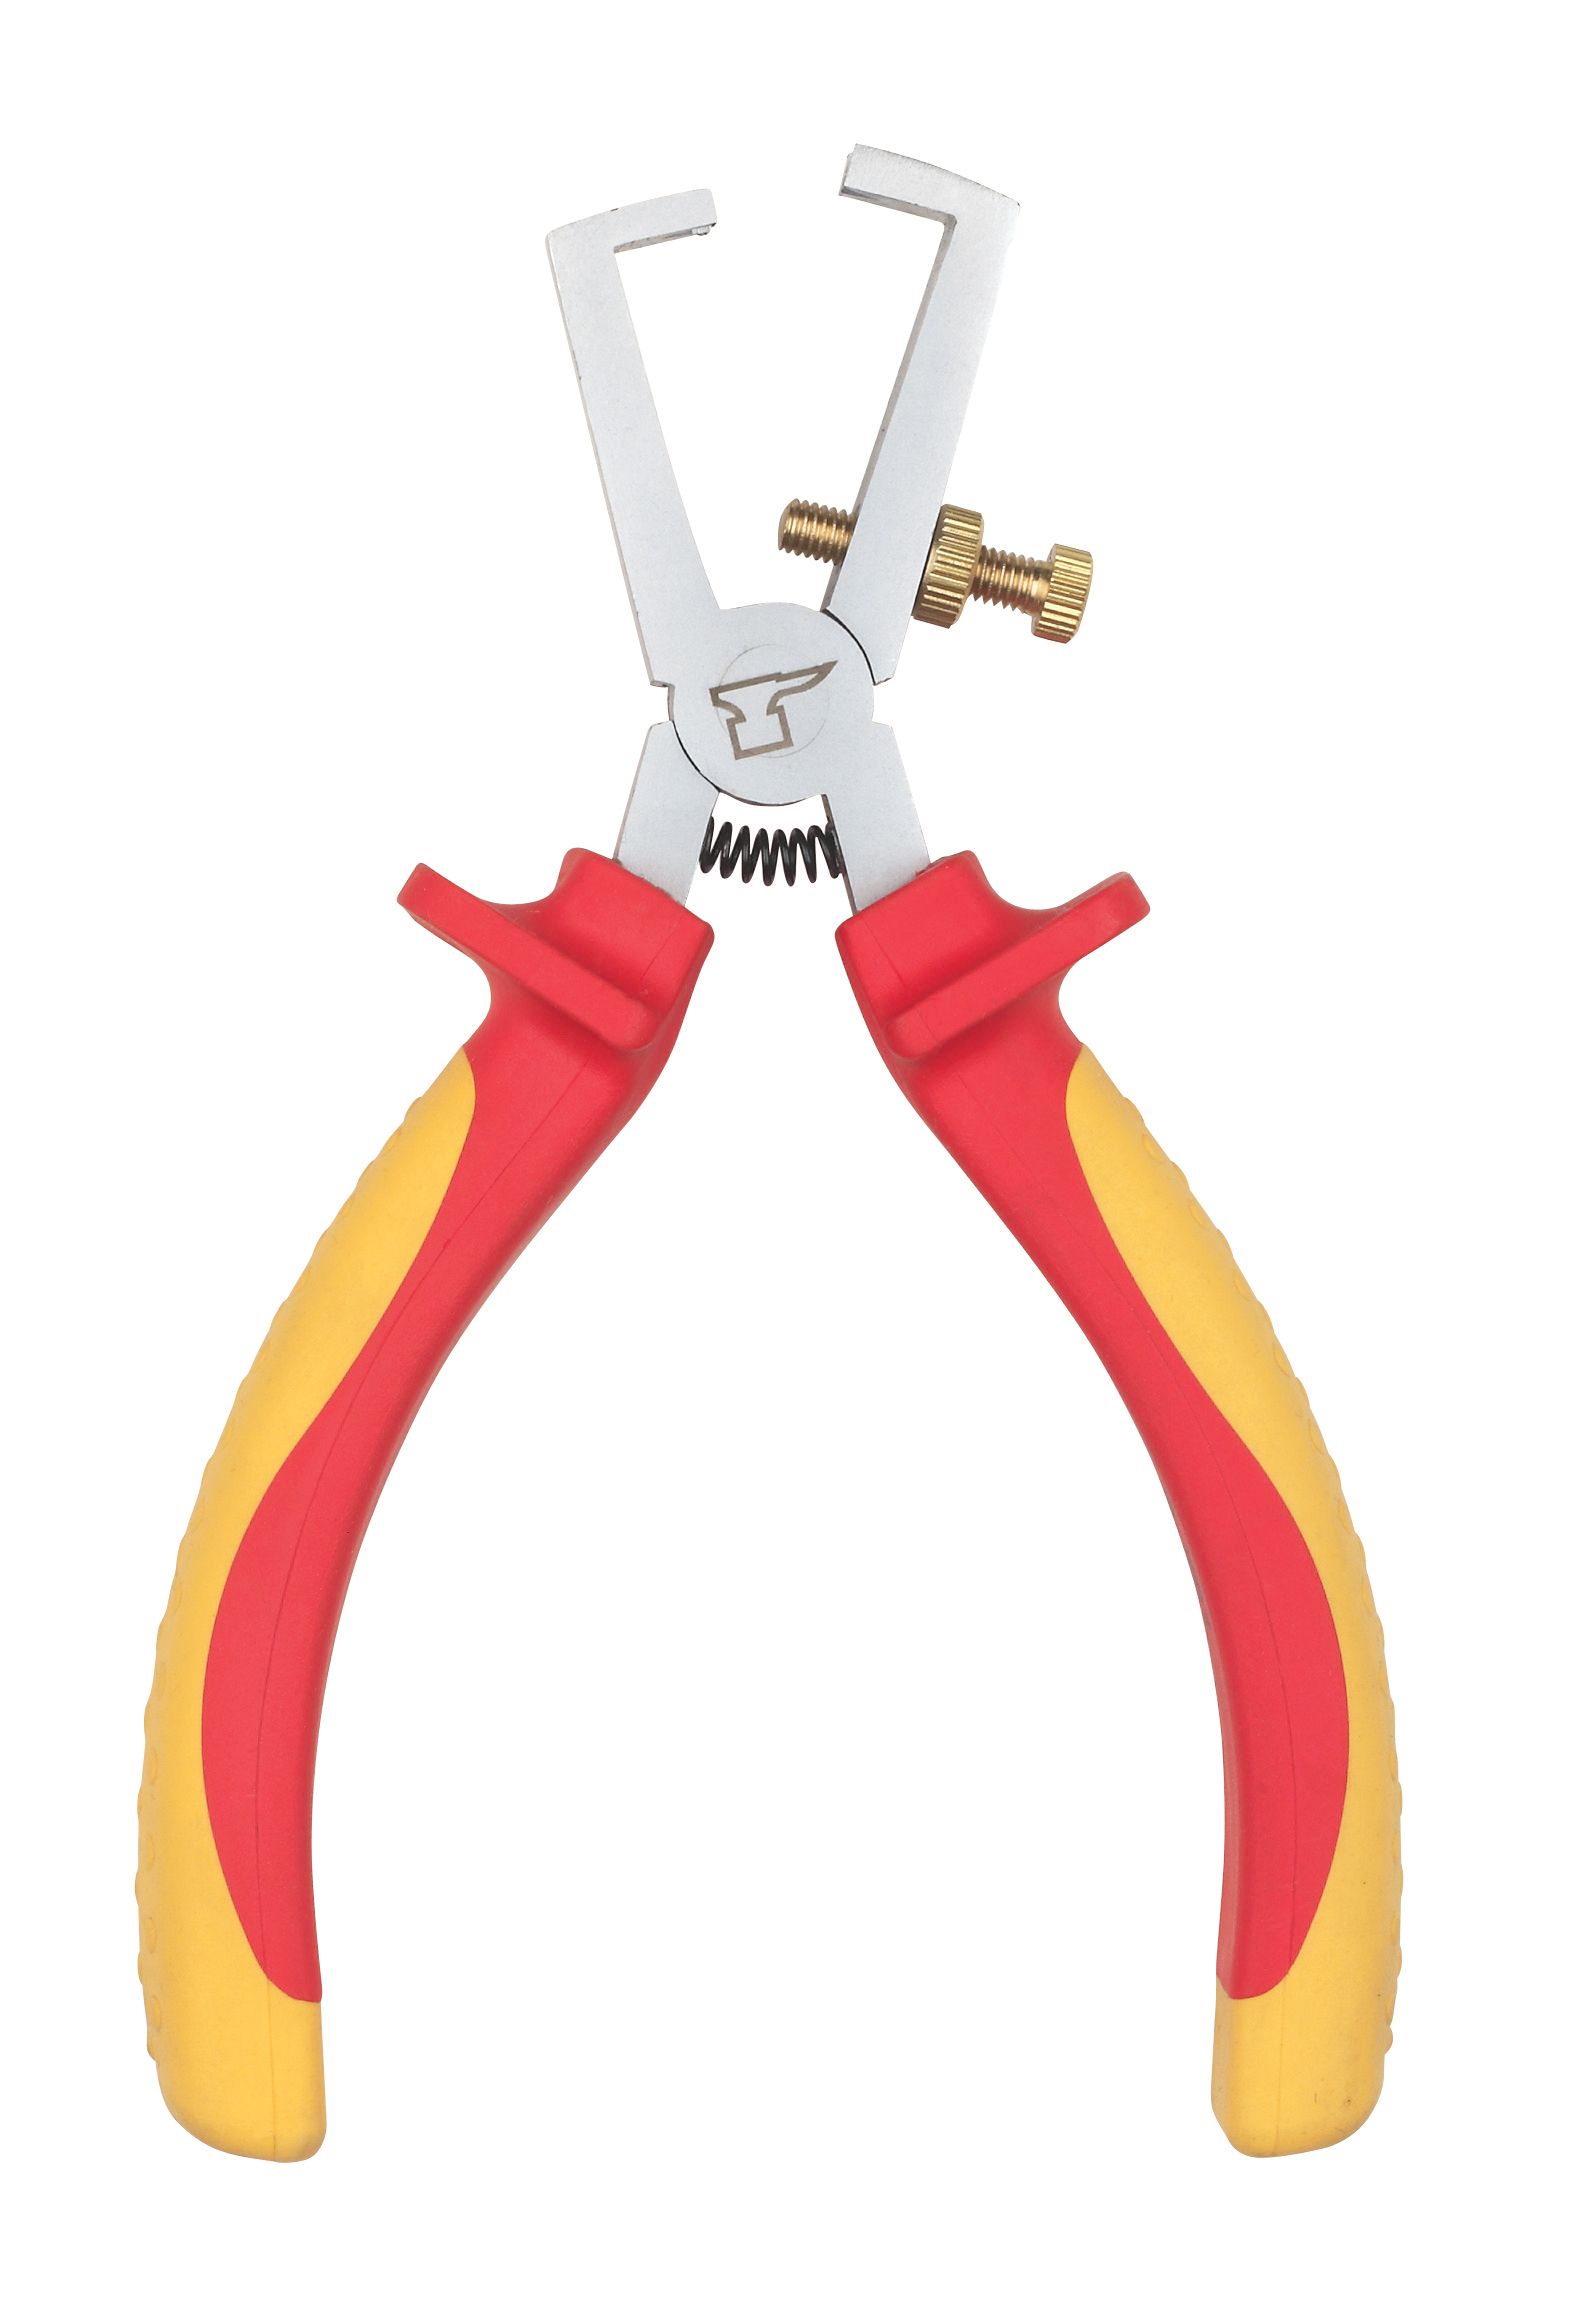 Forge Steel 6.5" Wire stripping pliers